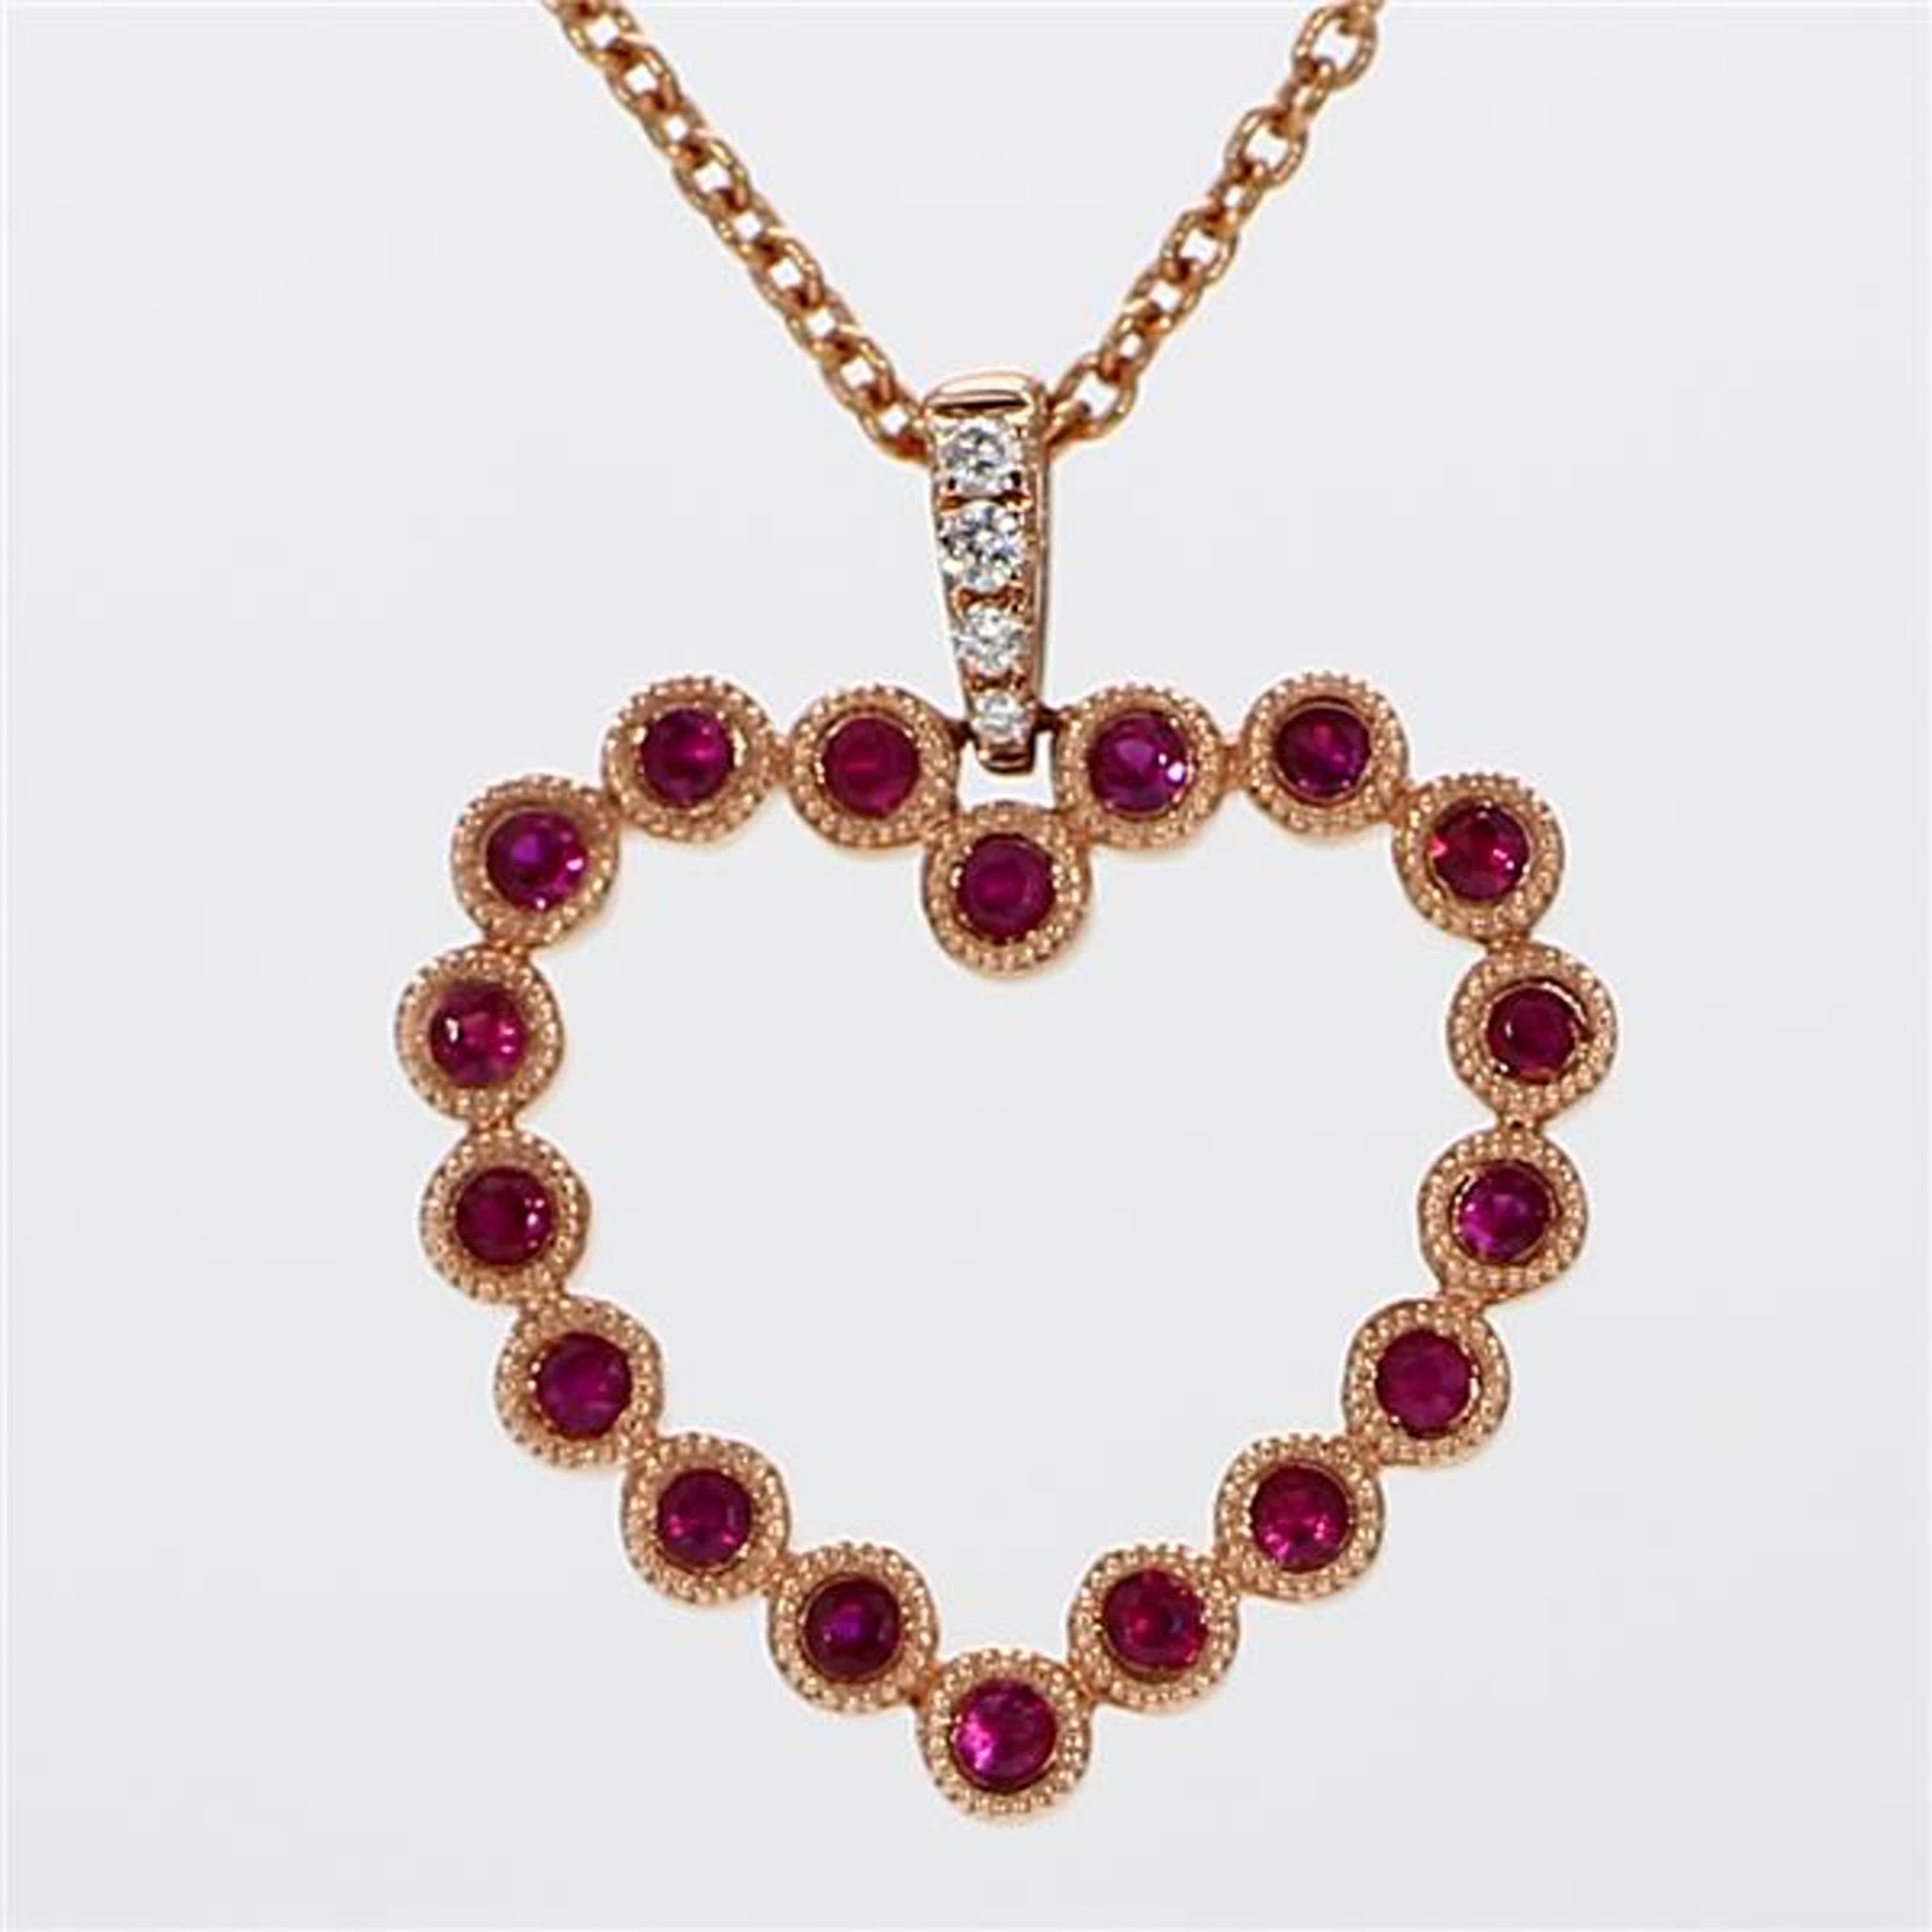 RareGemWorld's classic ruby pendant. Mounted in a beautiful 18K Rose Gold setting with a natural round cut red ruby's complimented by natural round cut white diamond melee in a beautiful heart shape. This pendant is guaranteed to impress and enhance